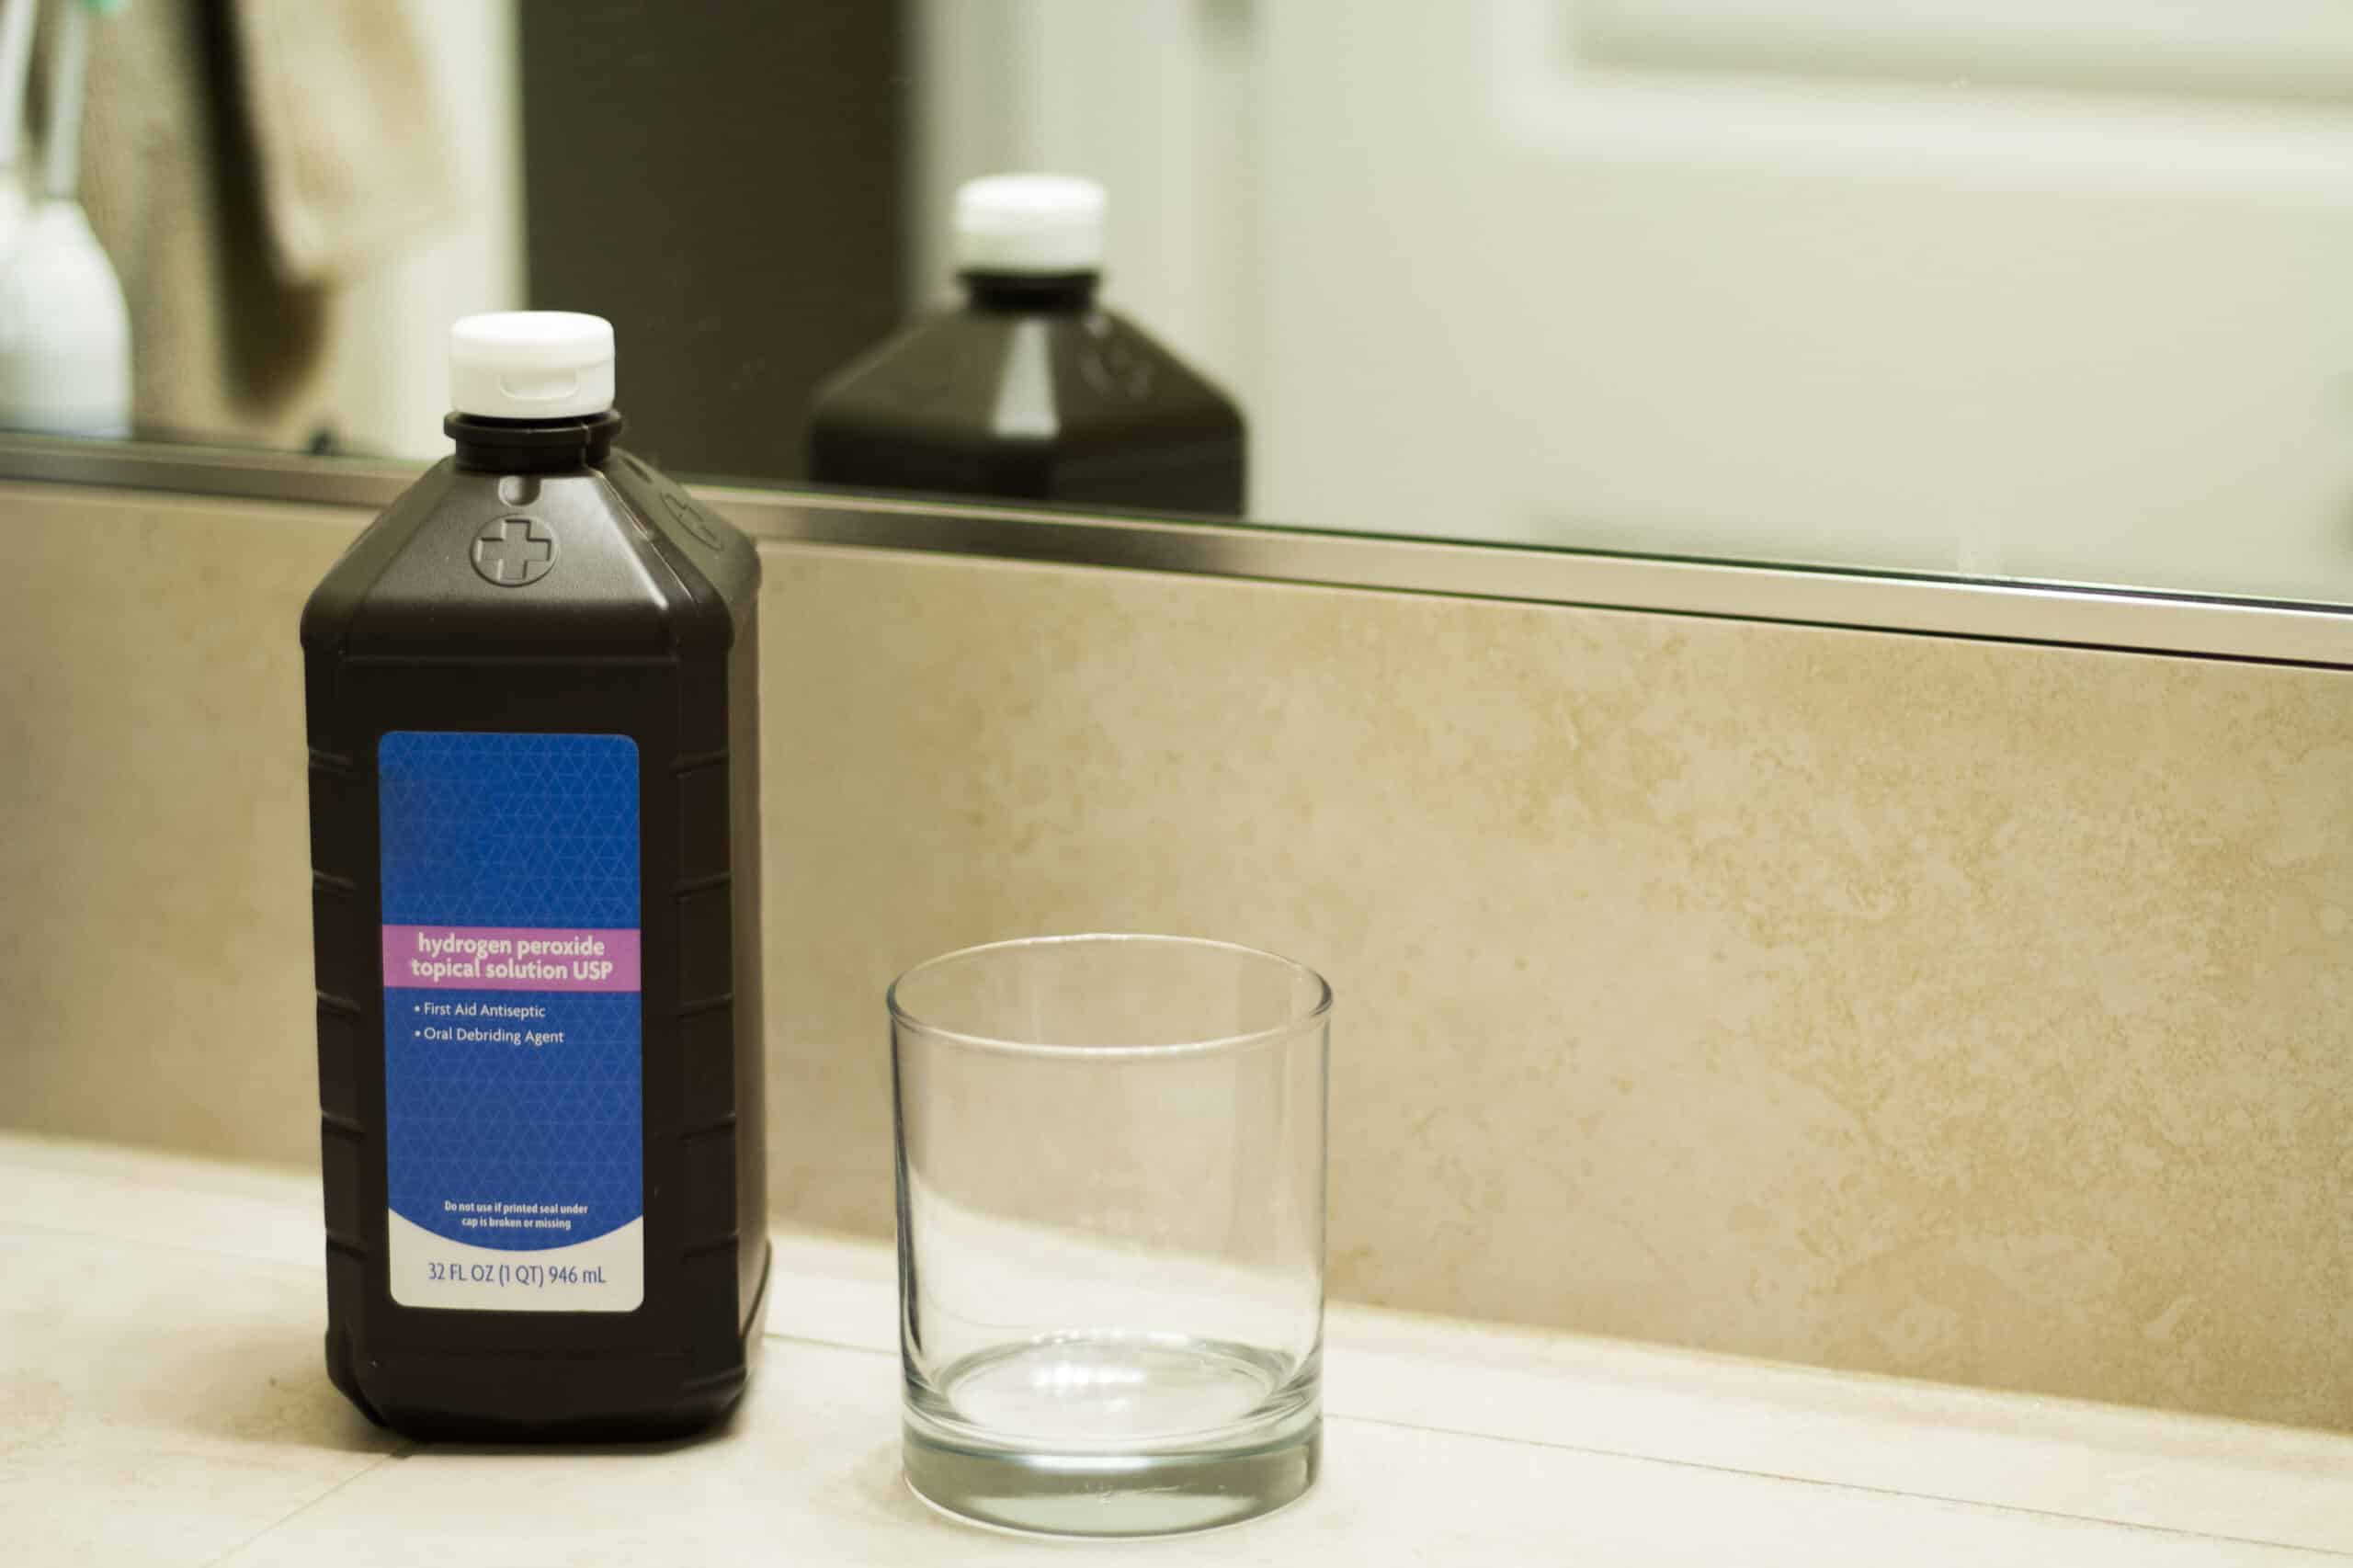 Is Hydrogen Peroxide Mouthwash Safe to Use?